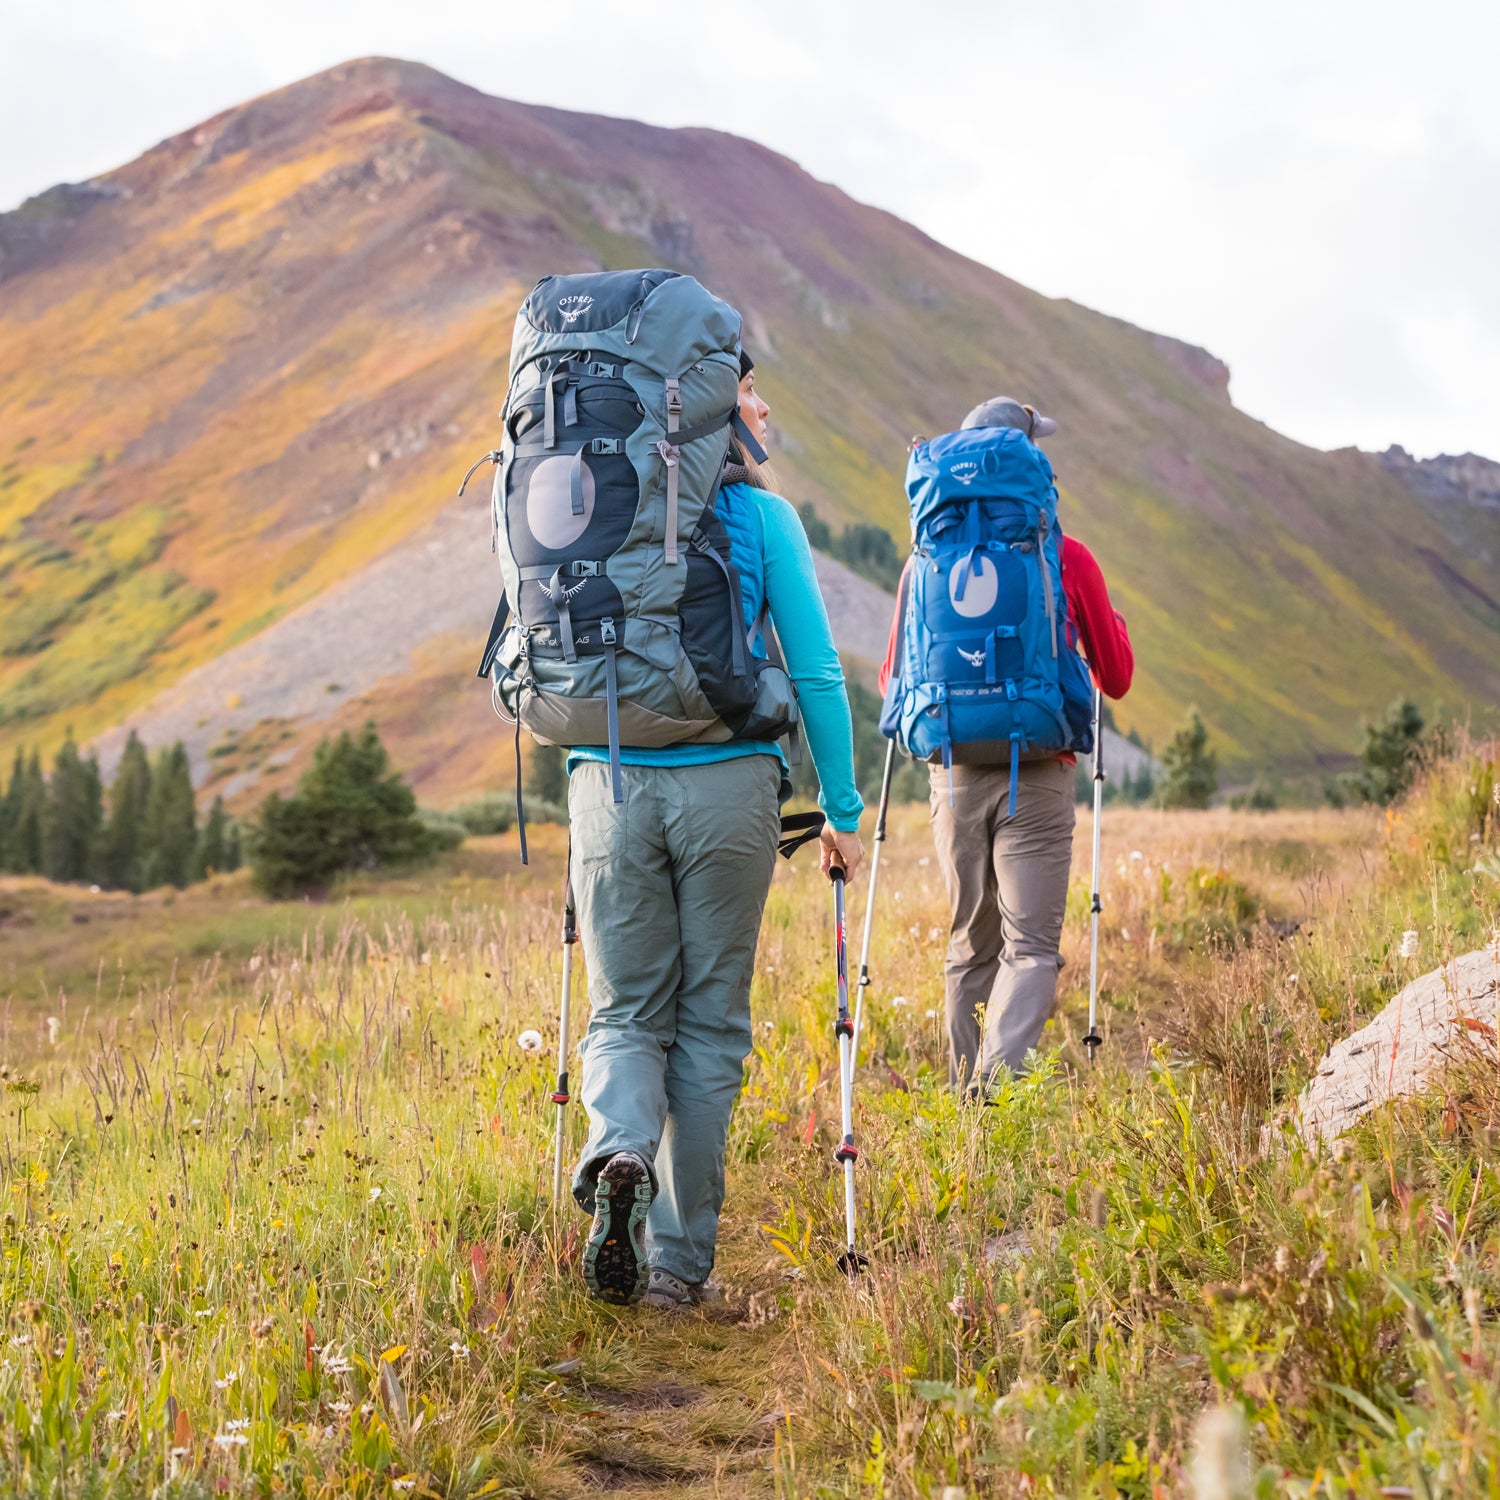 10 Best Women's Daypacks For Hiking Uprooted Traveler, 41% OFF